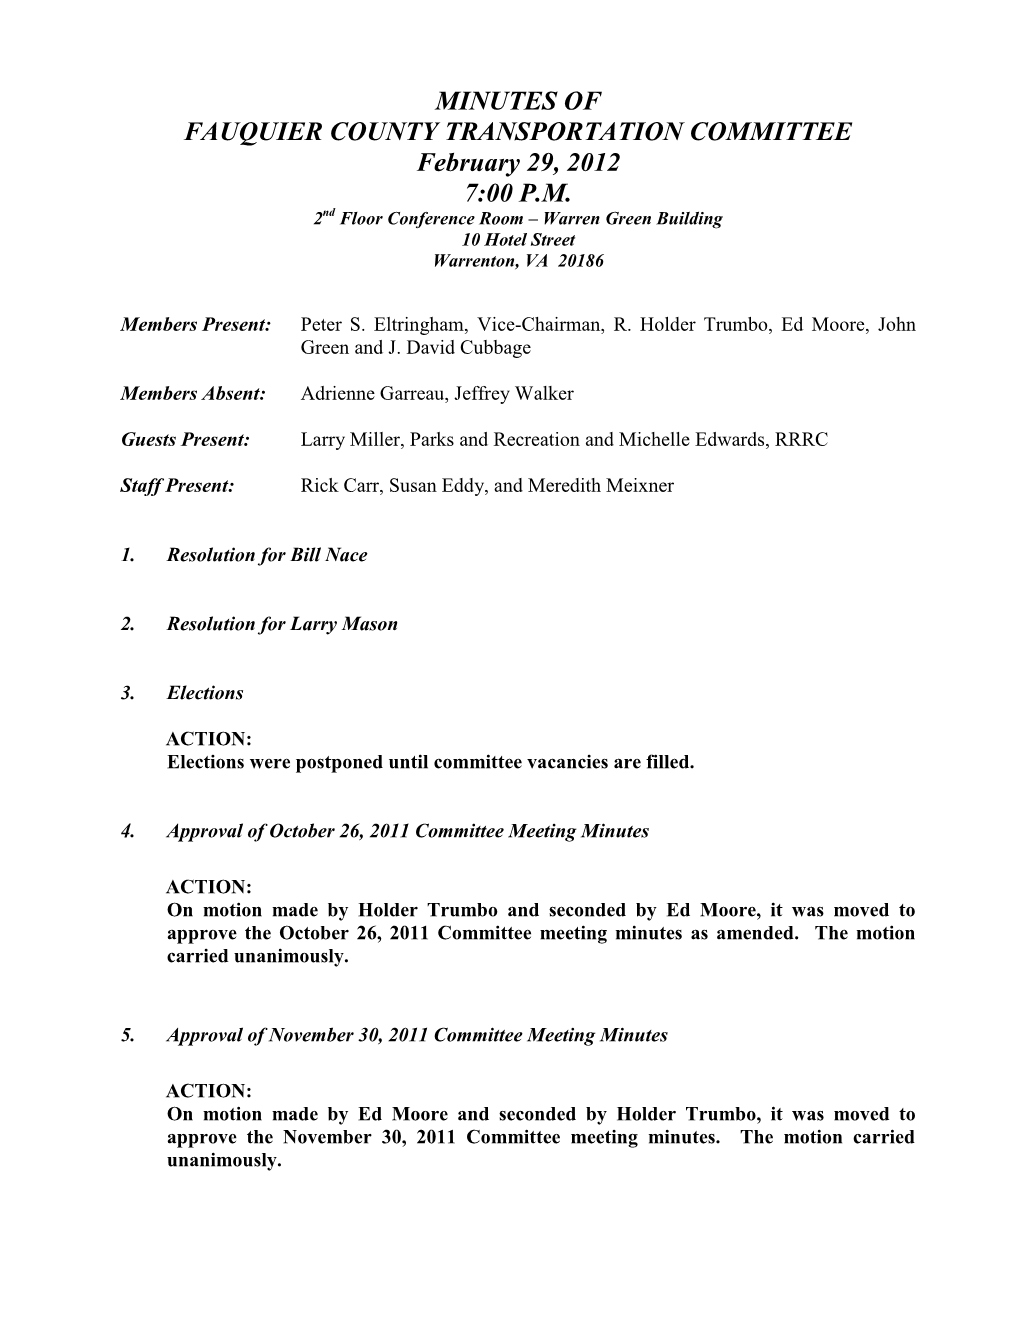 MINUTES of FAUQUIER COUNTY TRANSPORTATION COMMITTEE February 29, 2012 7:00 P.M